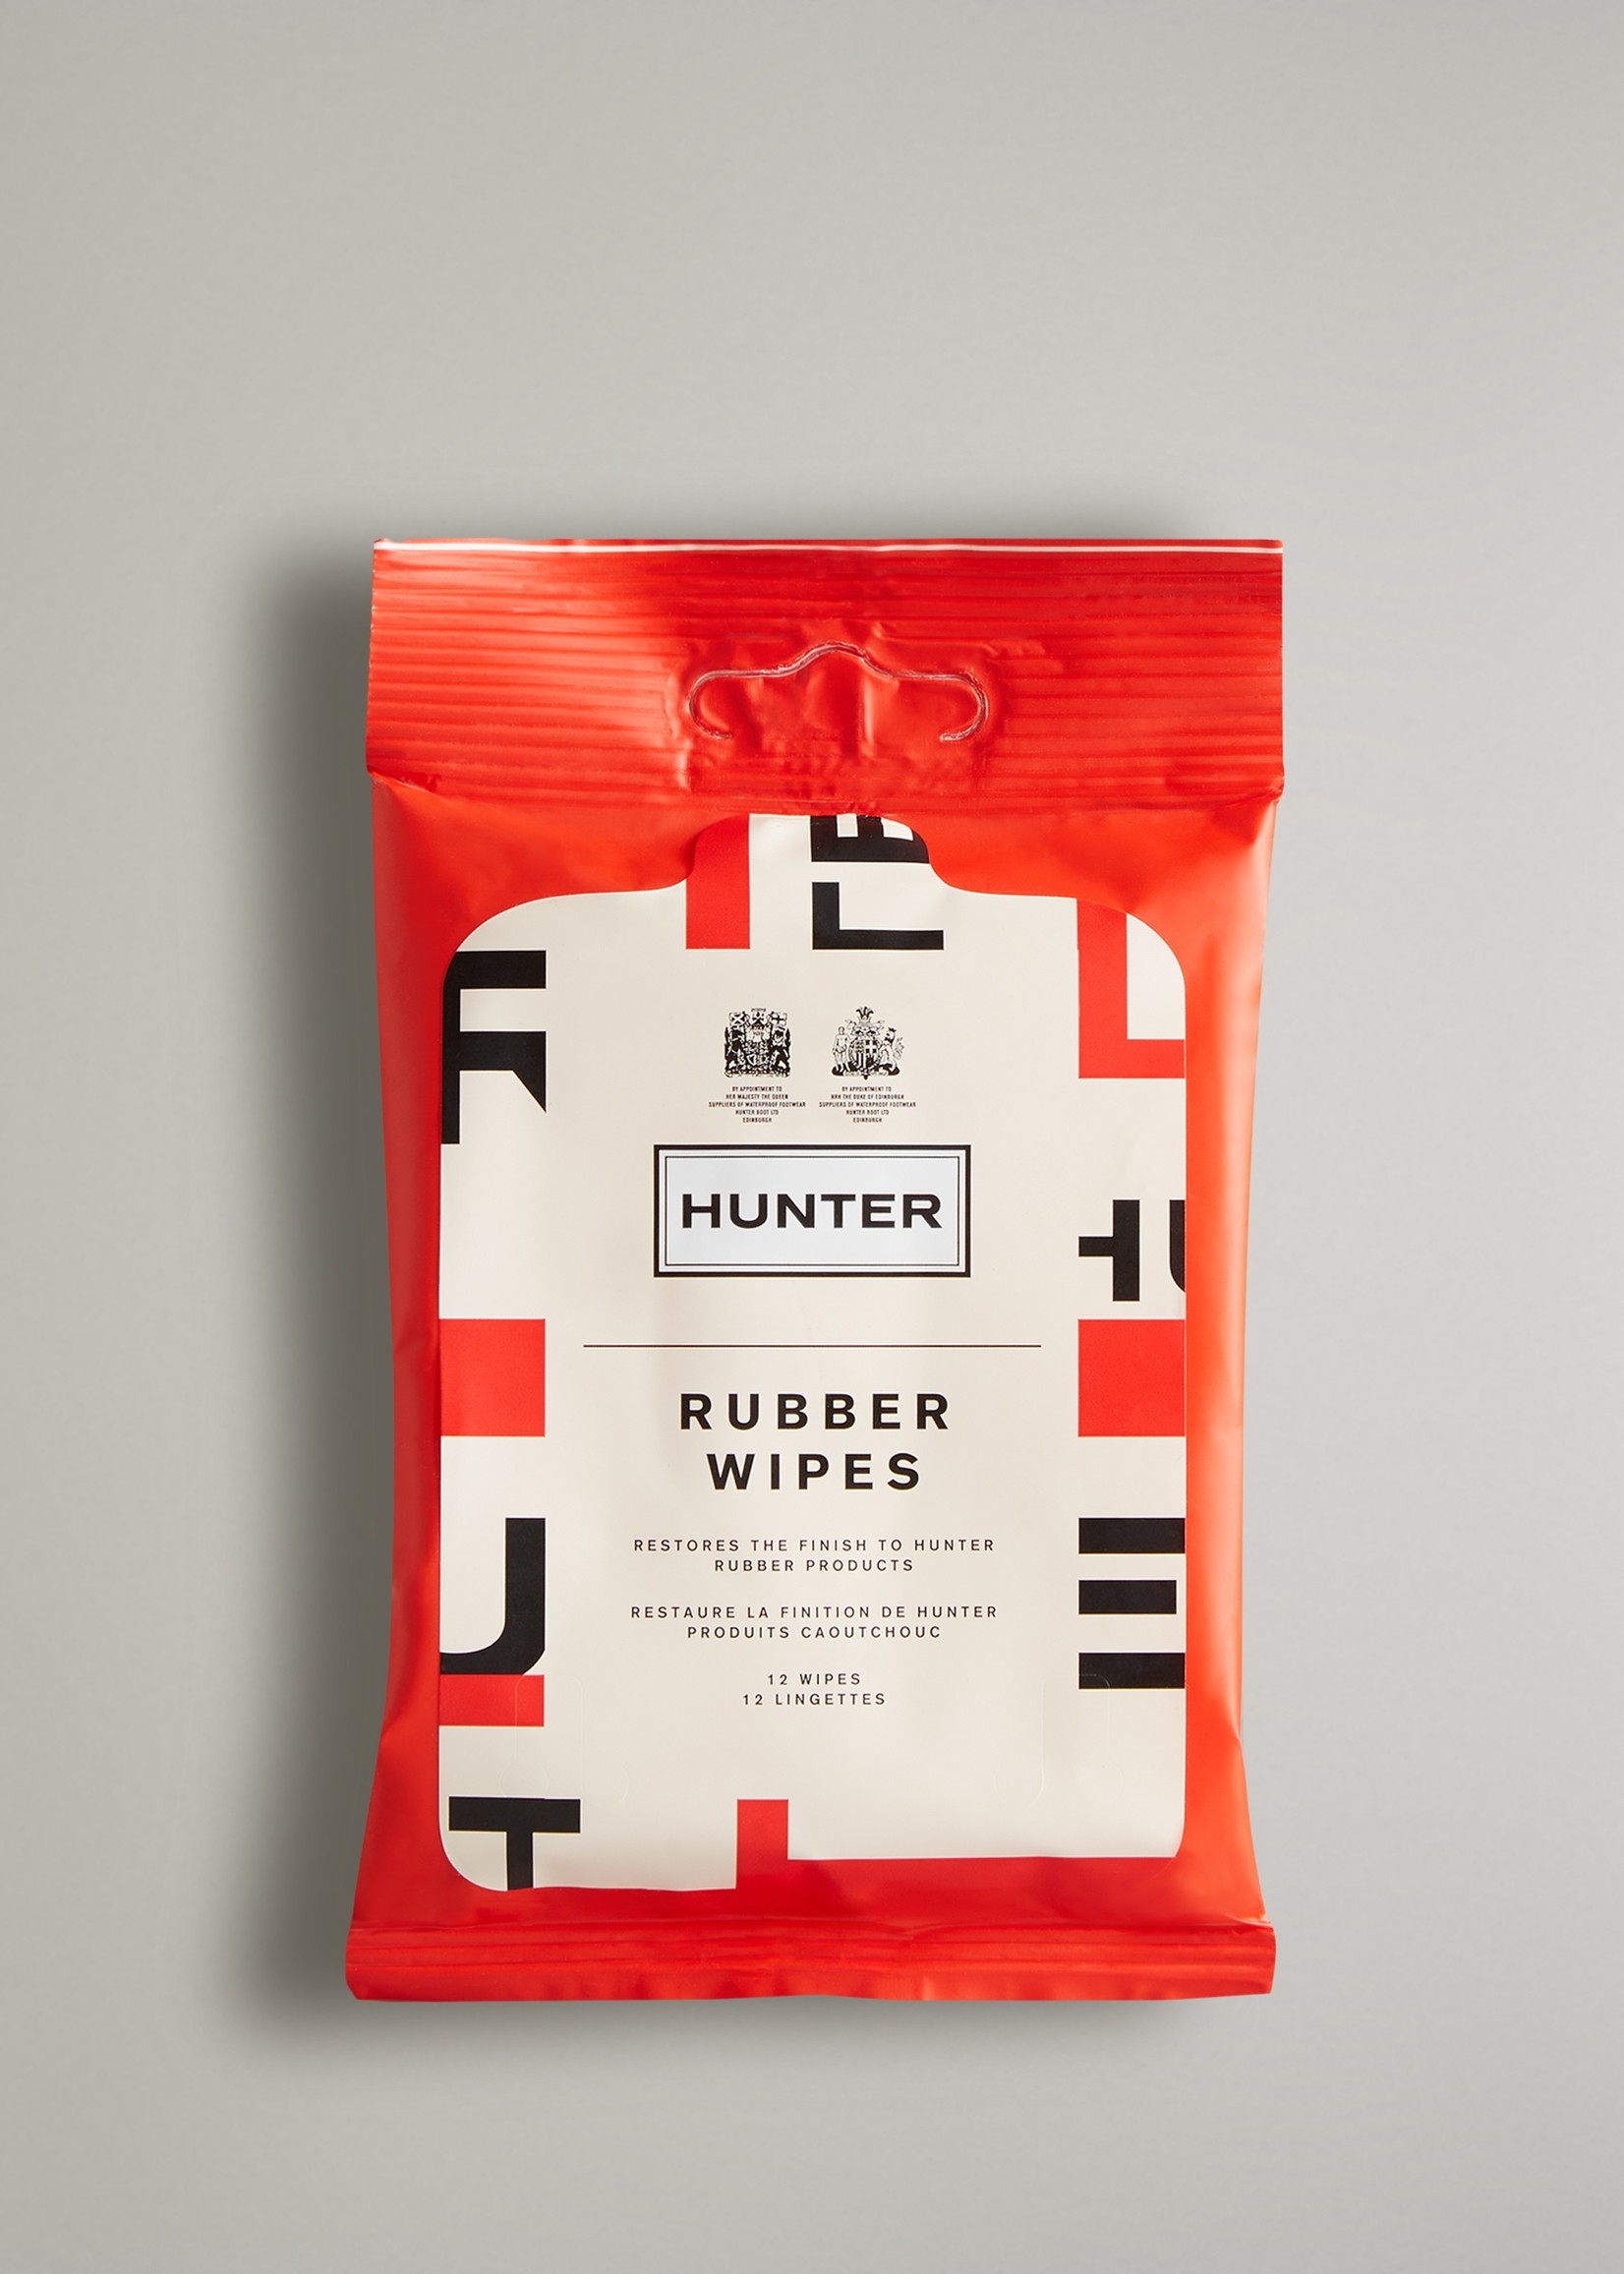 HUNTER RUBBER WIPES